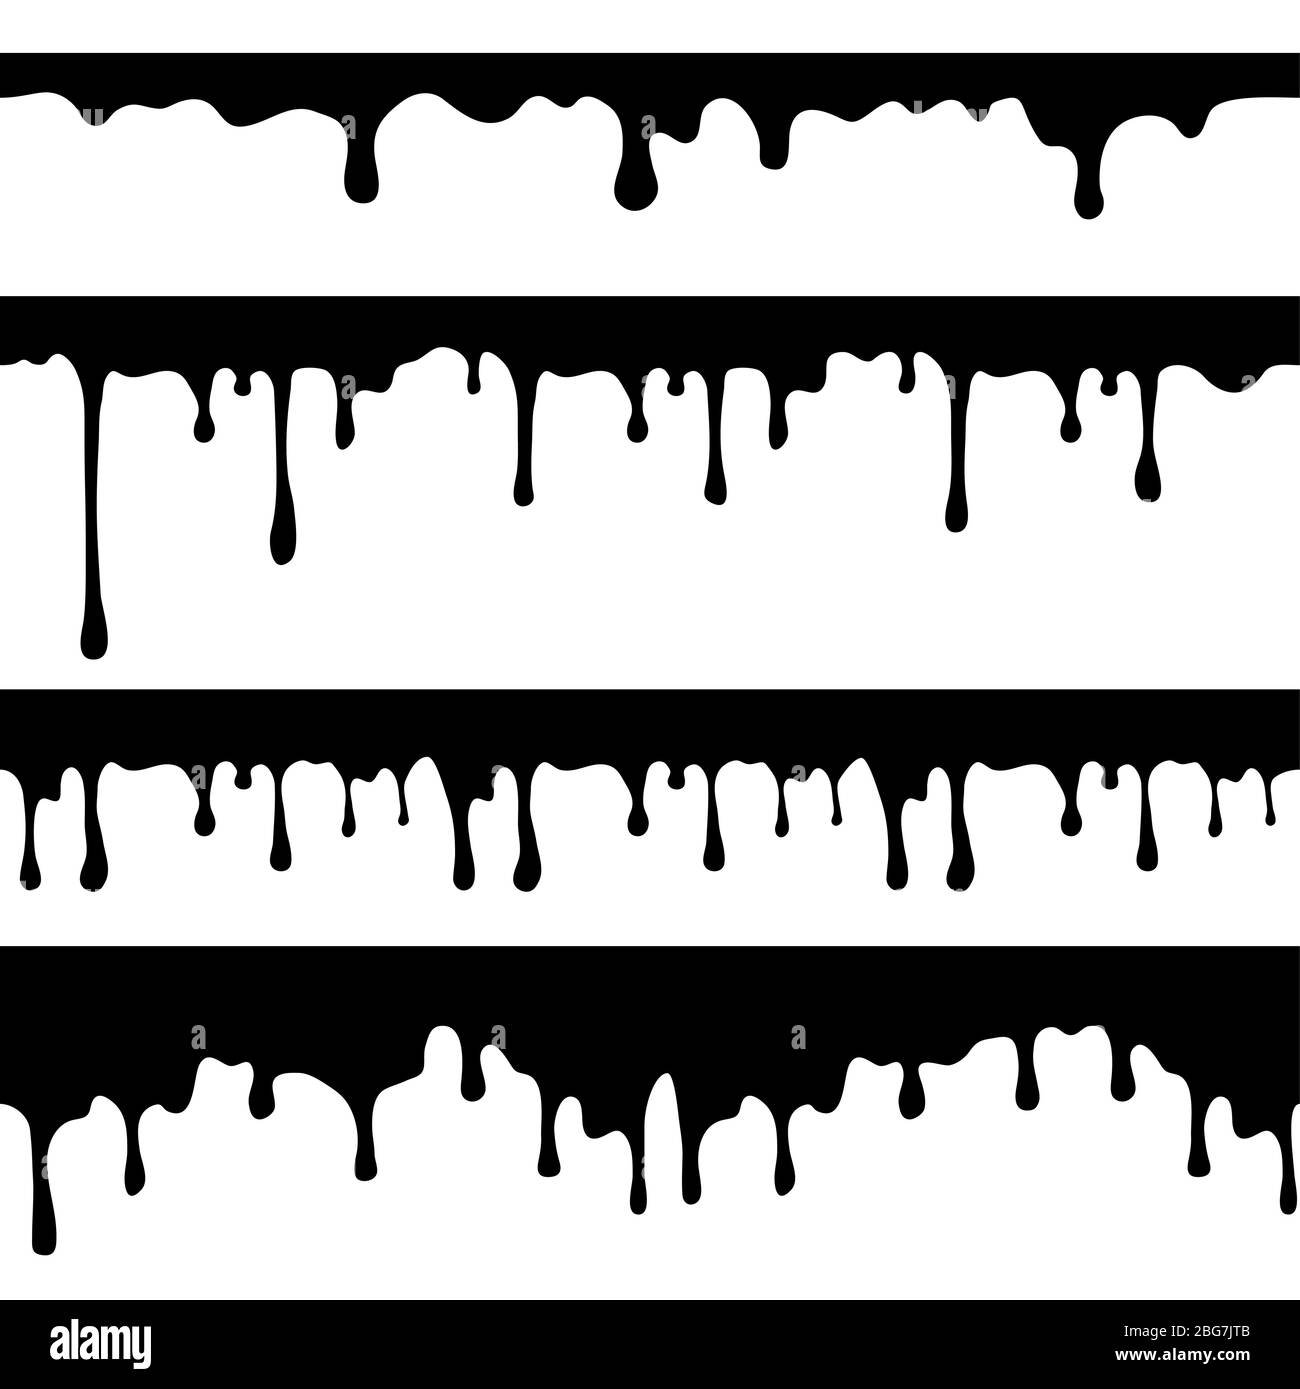 Paint dripping, black liquid or melted chocolate drips seamless vector currents isolated. Drip splash, trickle leak illustration Stock Vector